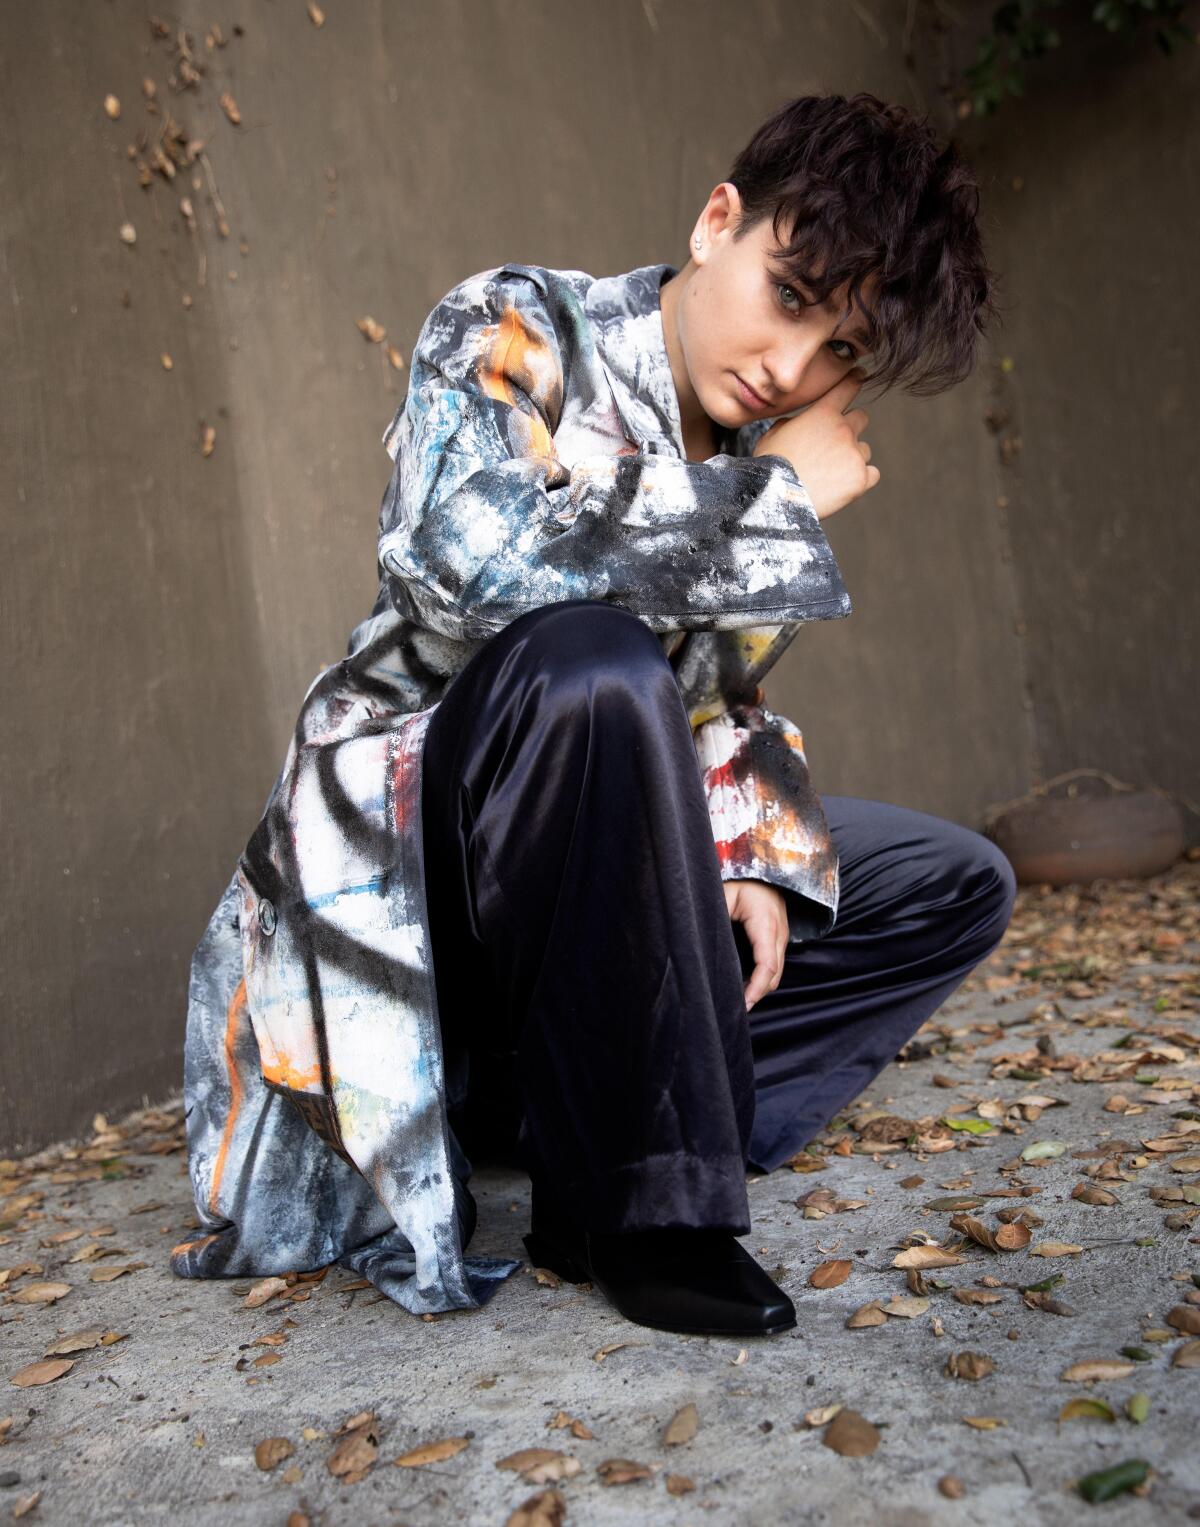 Bex Taylor-Klaus played a nonbinary character on Fox’s now-canceled "Deputy."